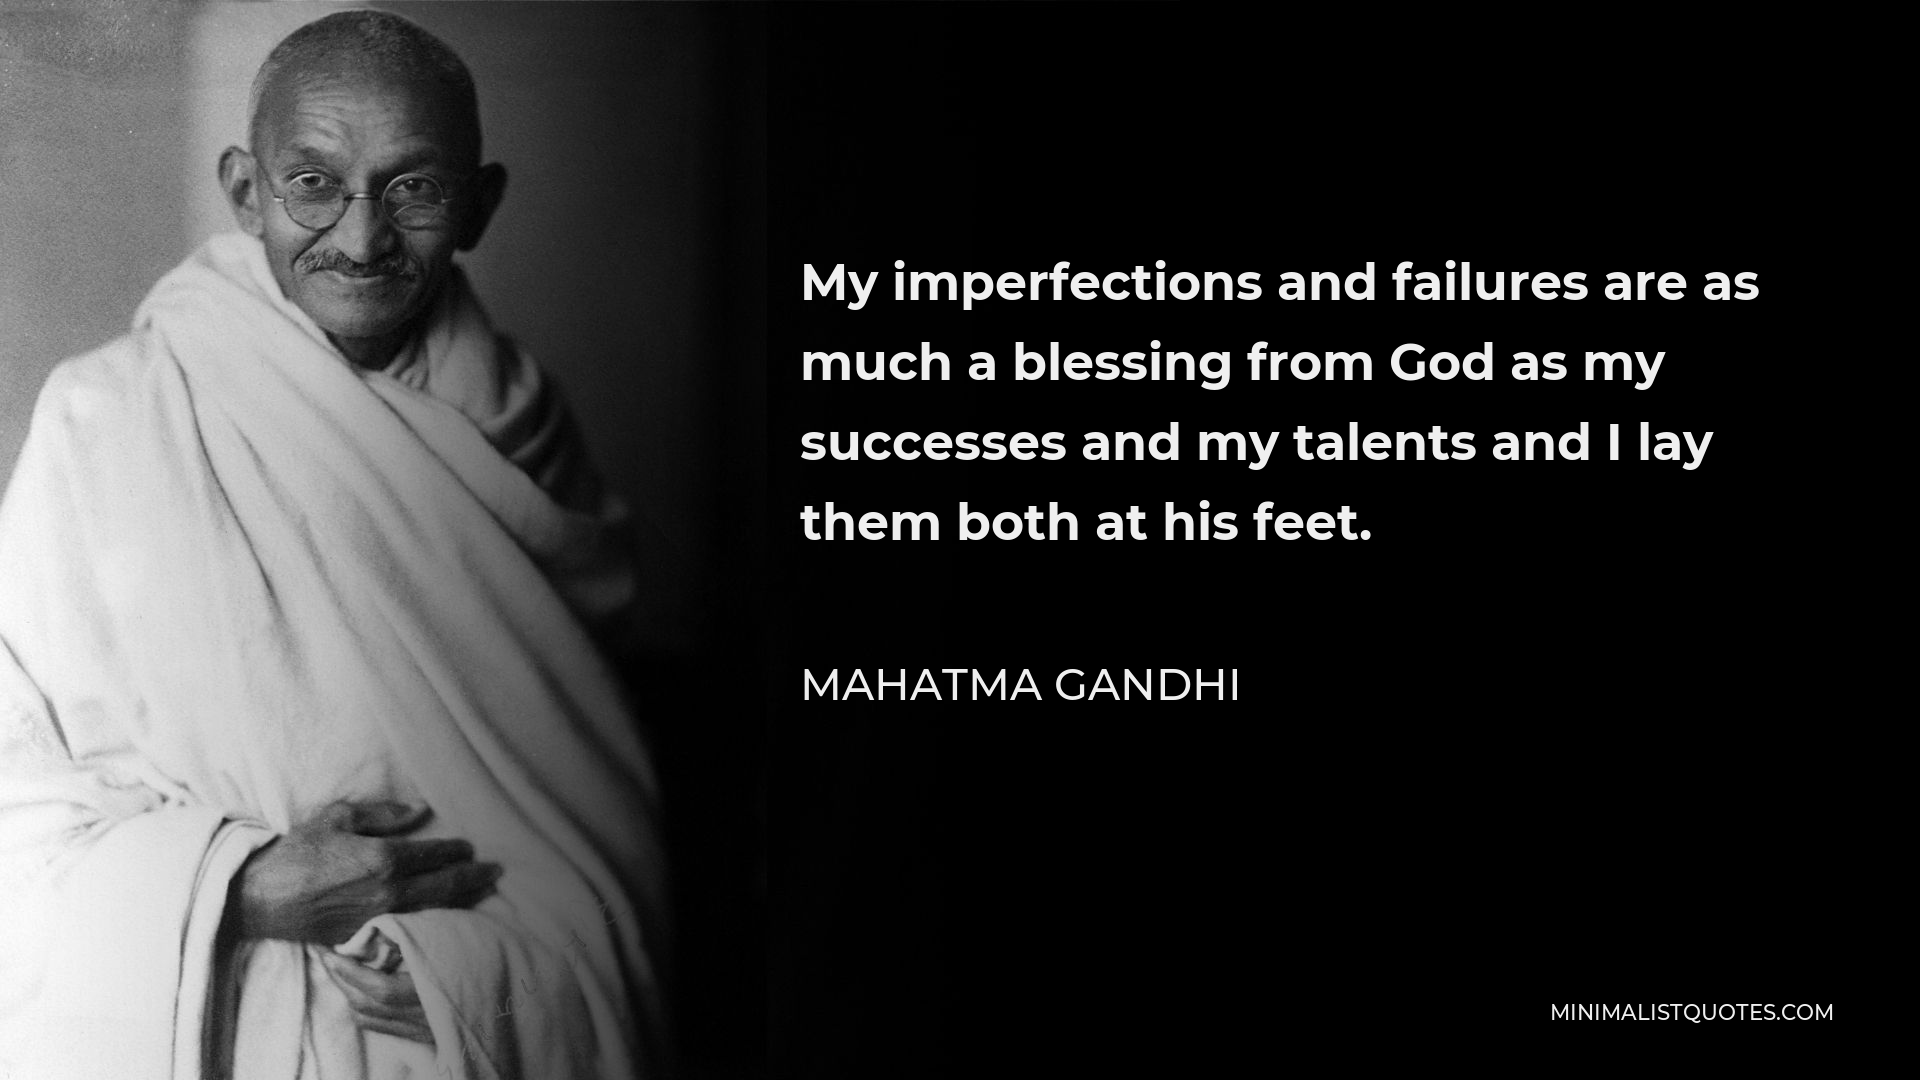 Mahatma Gandhi Quote - My imperfections and failures are as much a blessing from God as my successes and my talents and I lay them both at his feet.